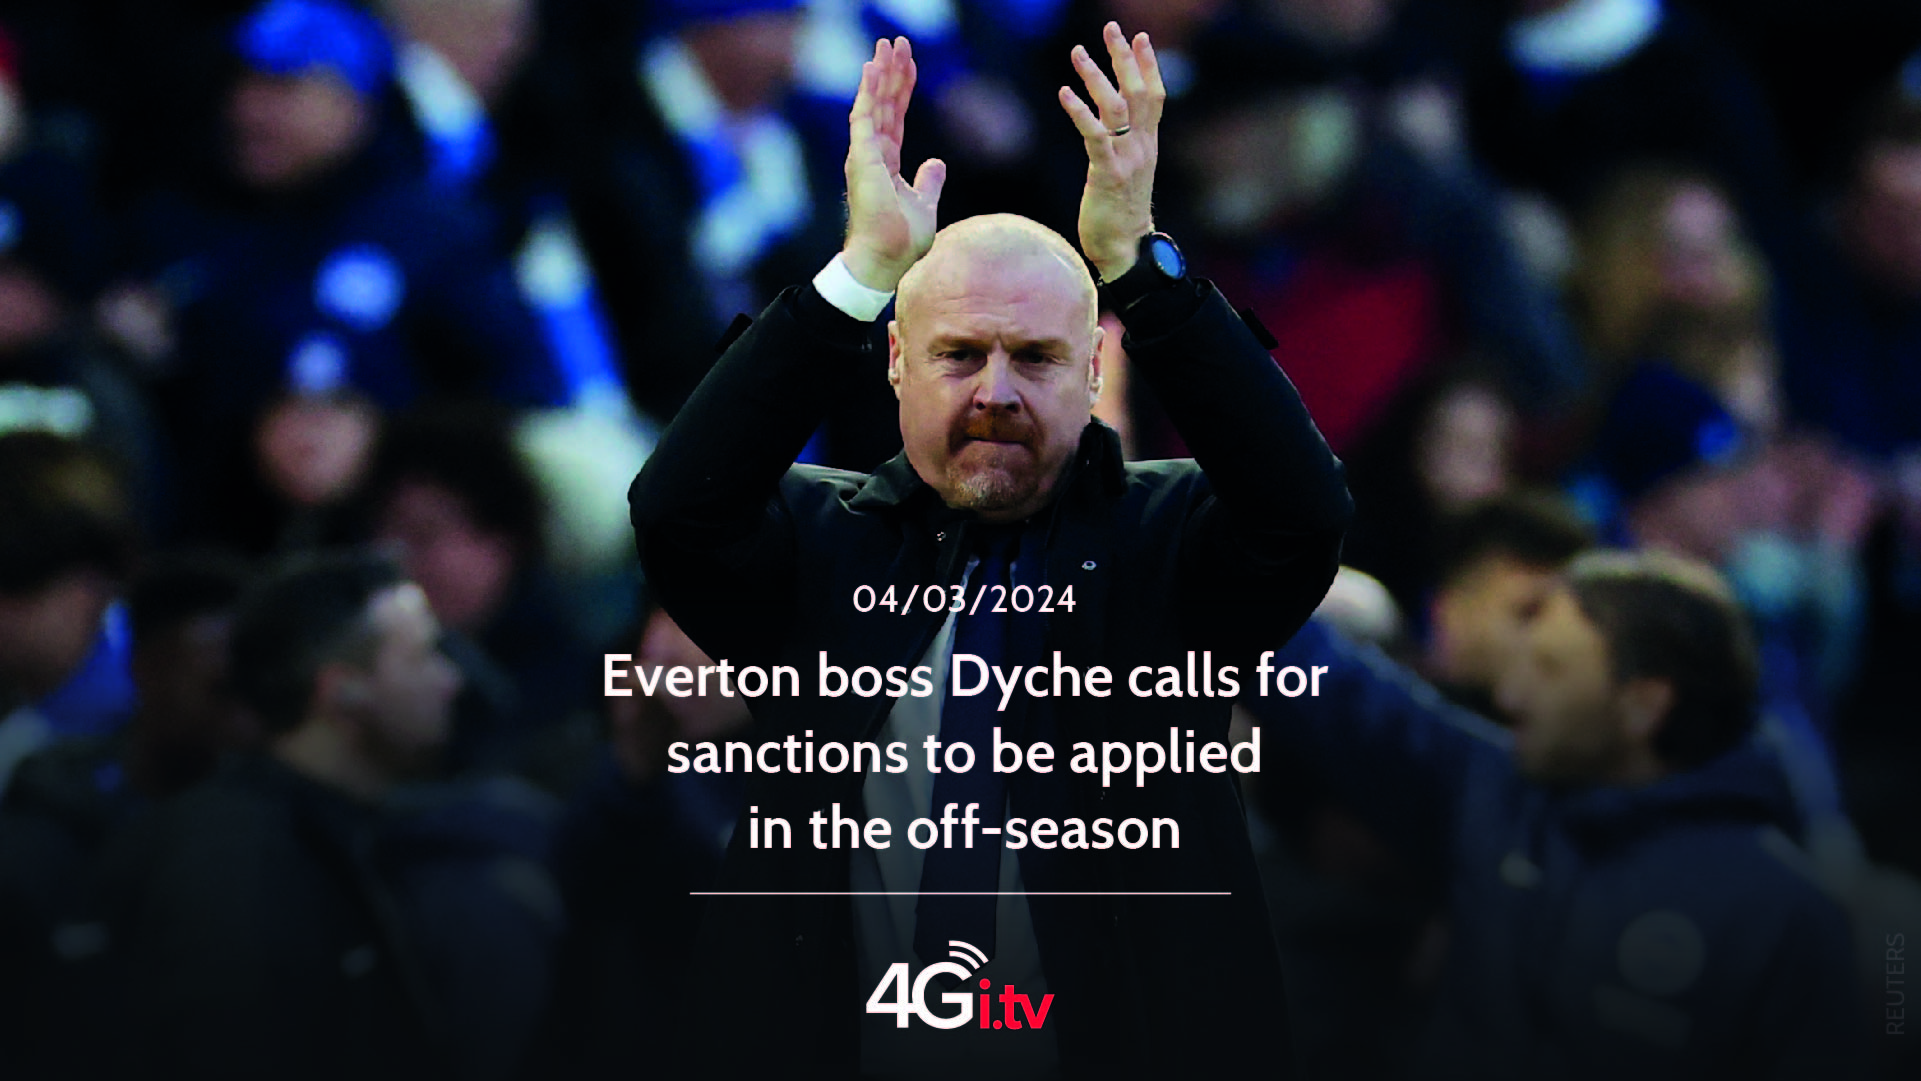 Подробнее о статье Everton boss Dyche calls for sanctions to be applied in the off-season